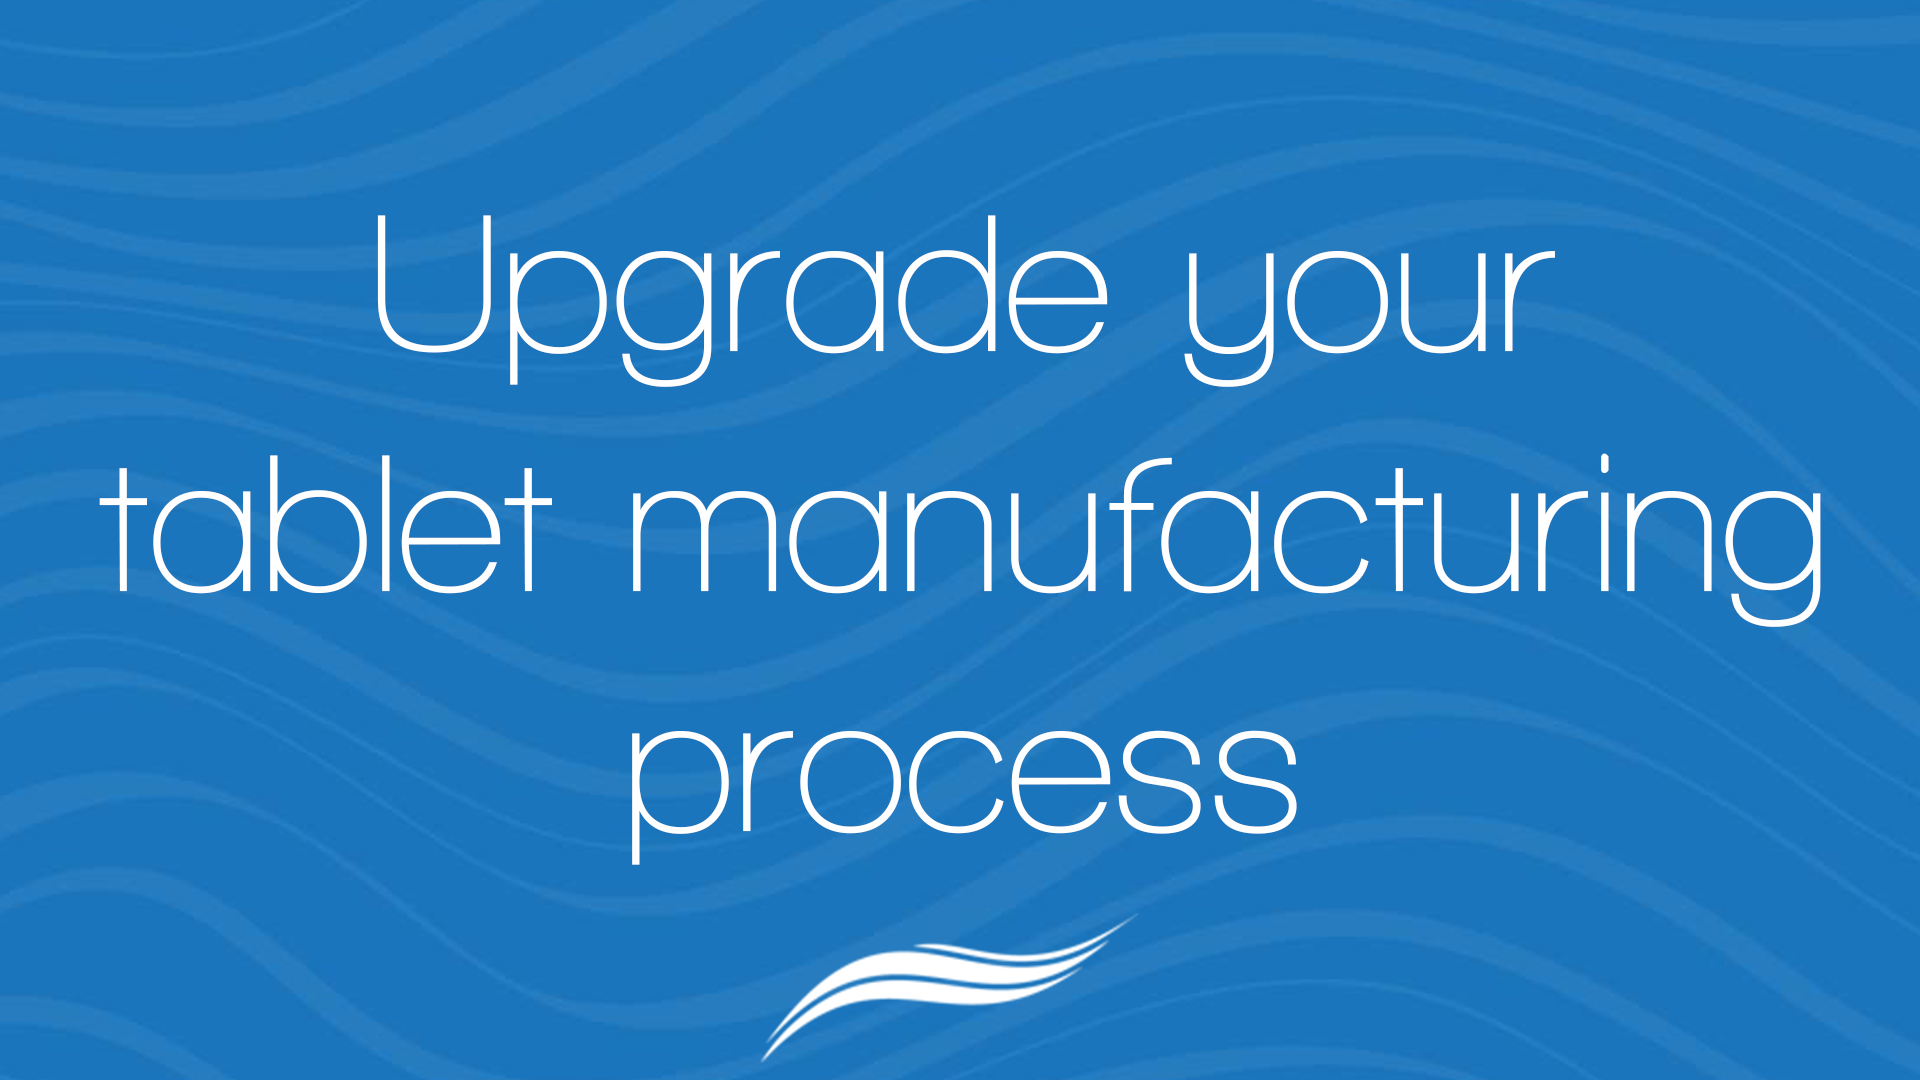 Upgrade your tablet manufacturing process